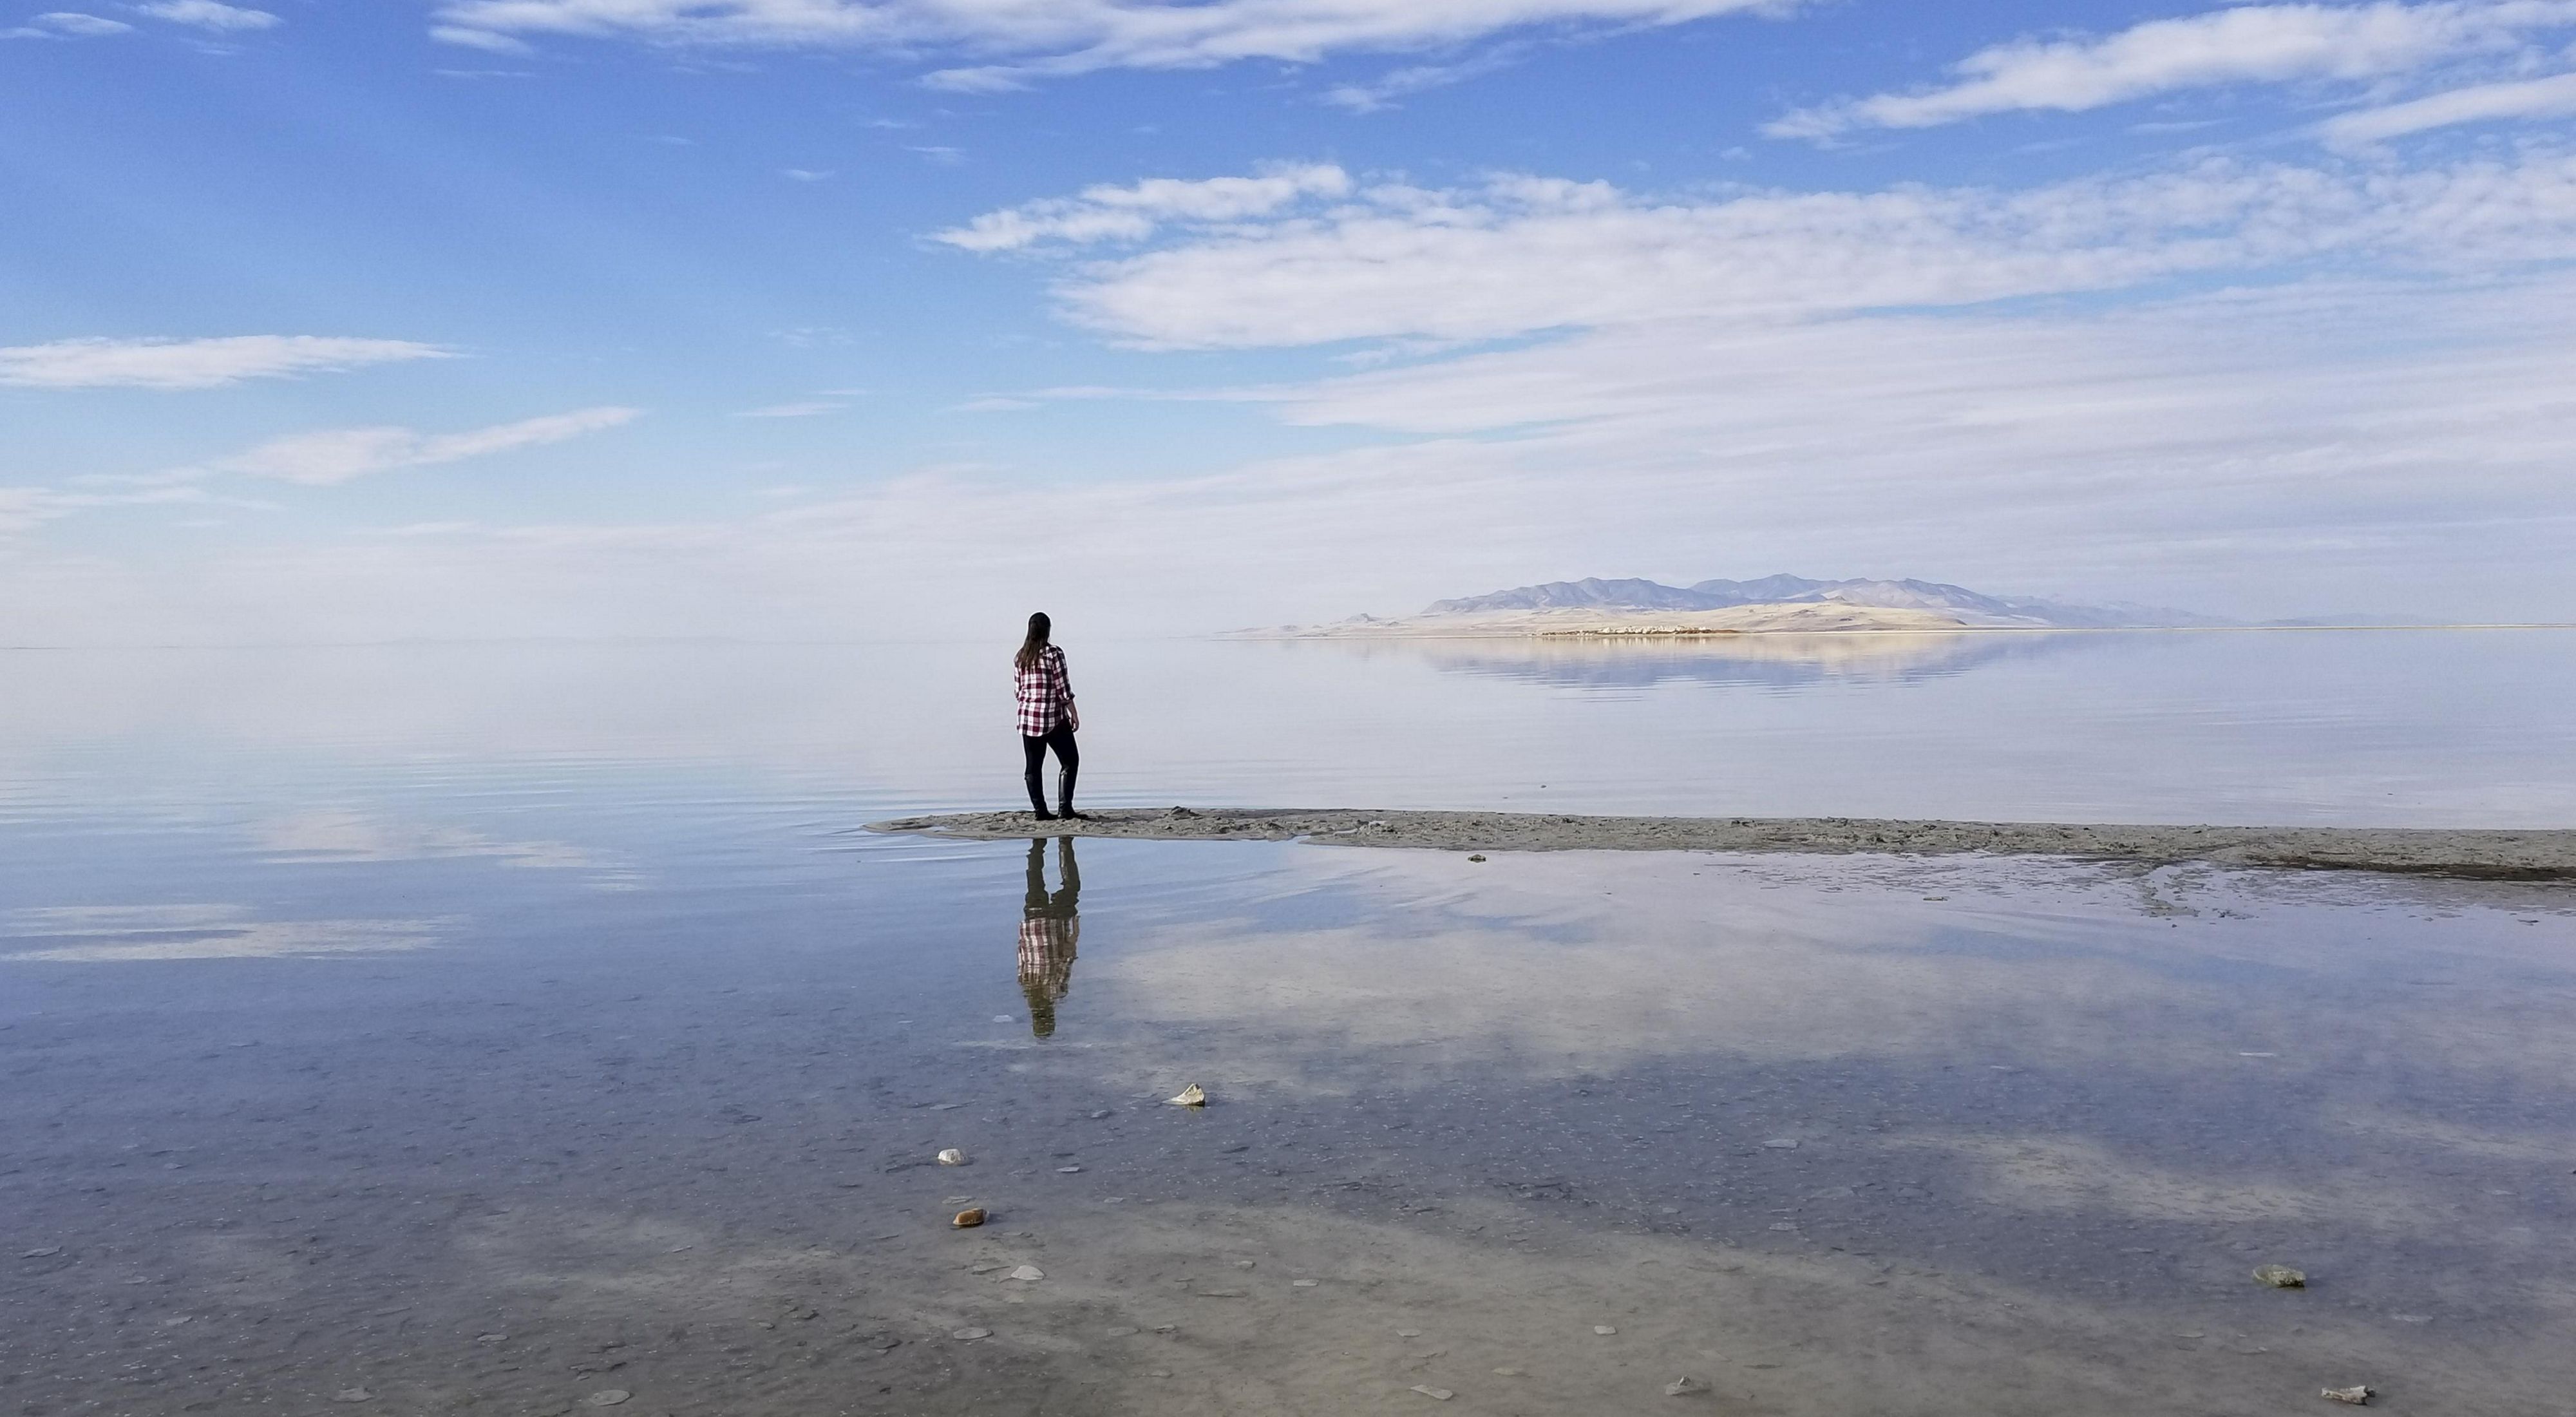 A person standing in the Great Salt Lake under a blue sky.